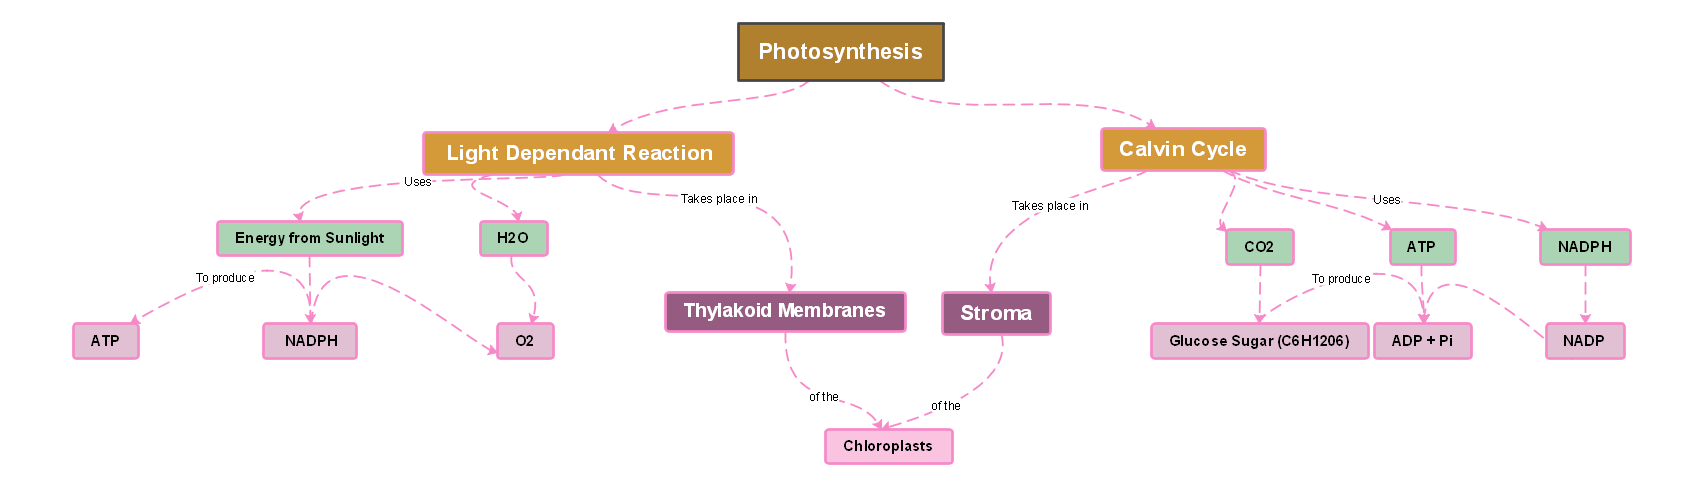 Photosynthesis Concept Map